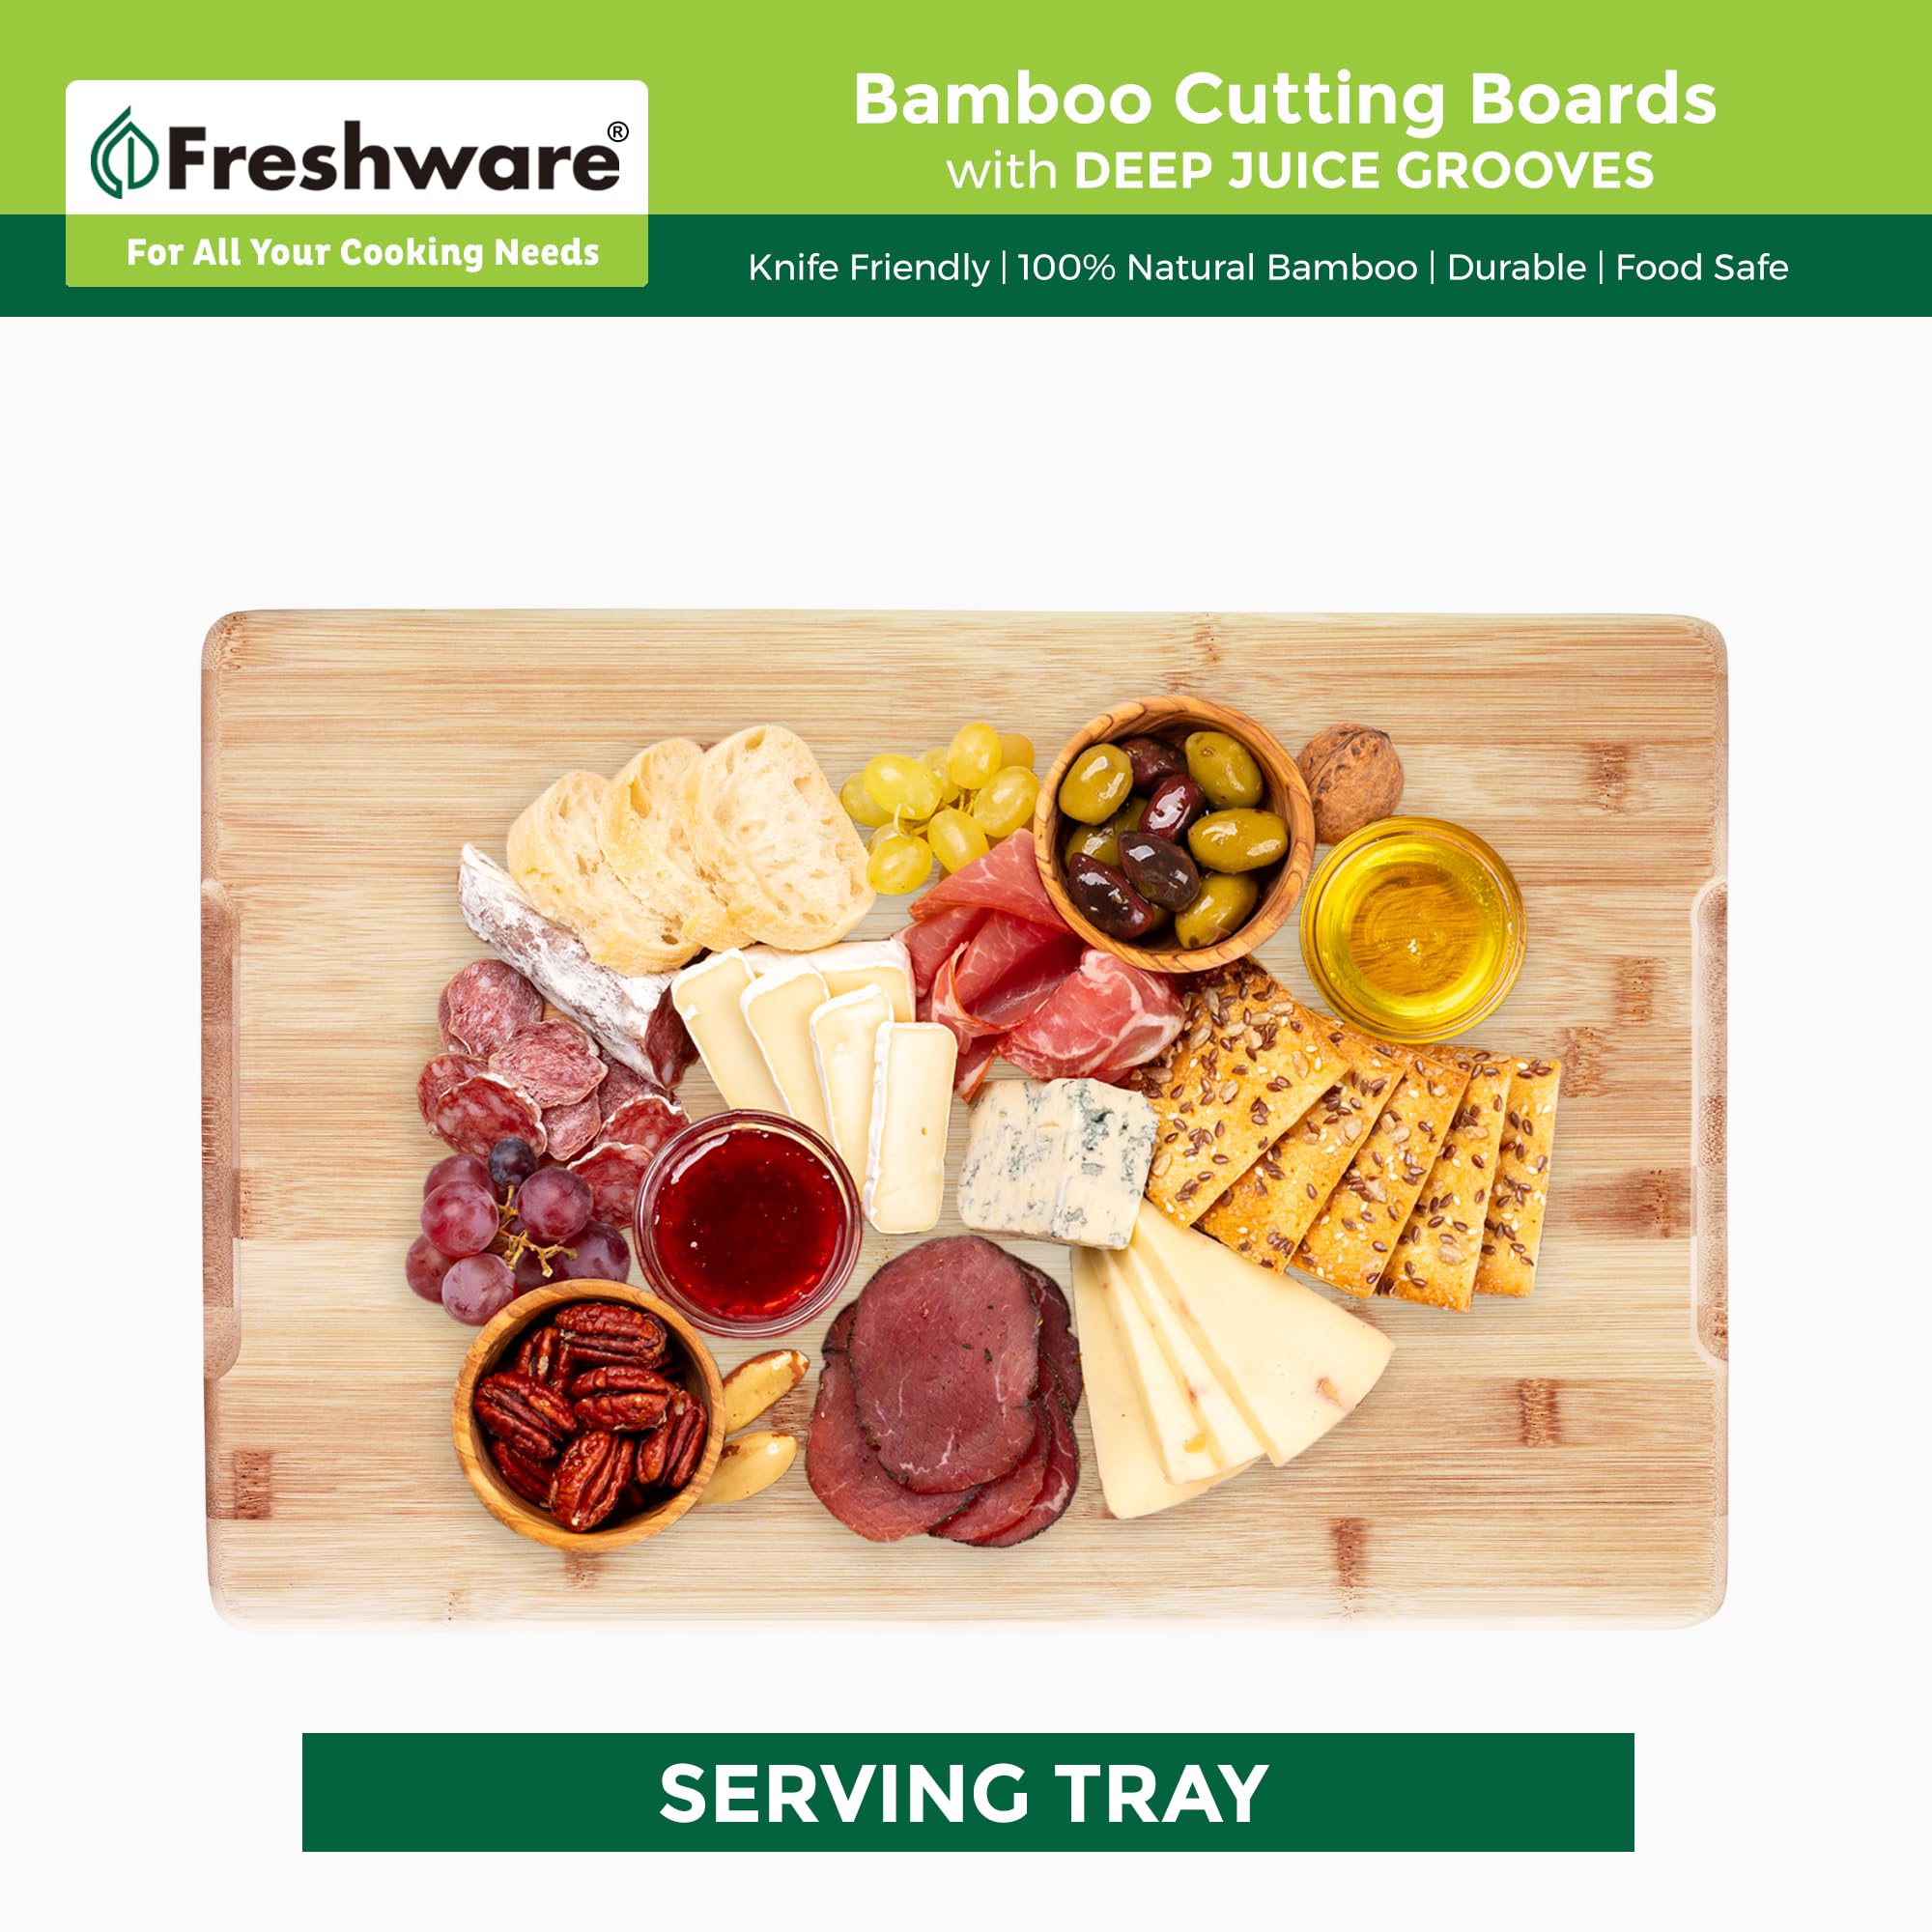 Freshware 24 Inch 3XL Bamboo Cutting Boards for Kitchen, Stove Top Butcher Block, Extra Large Wooden Carving Board for Meat, Veggies, Charcuterie Board with Deep Juice Grooves (3XL, 24x18